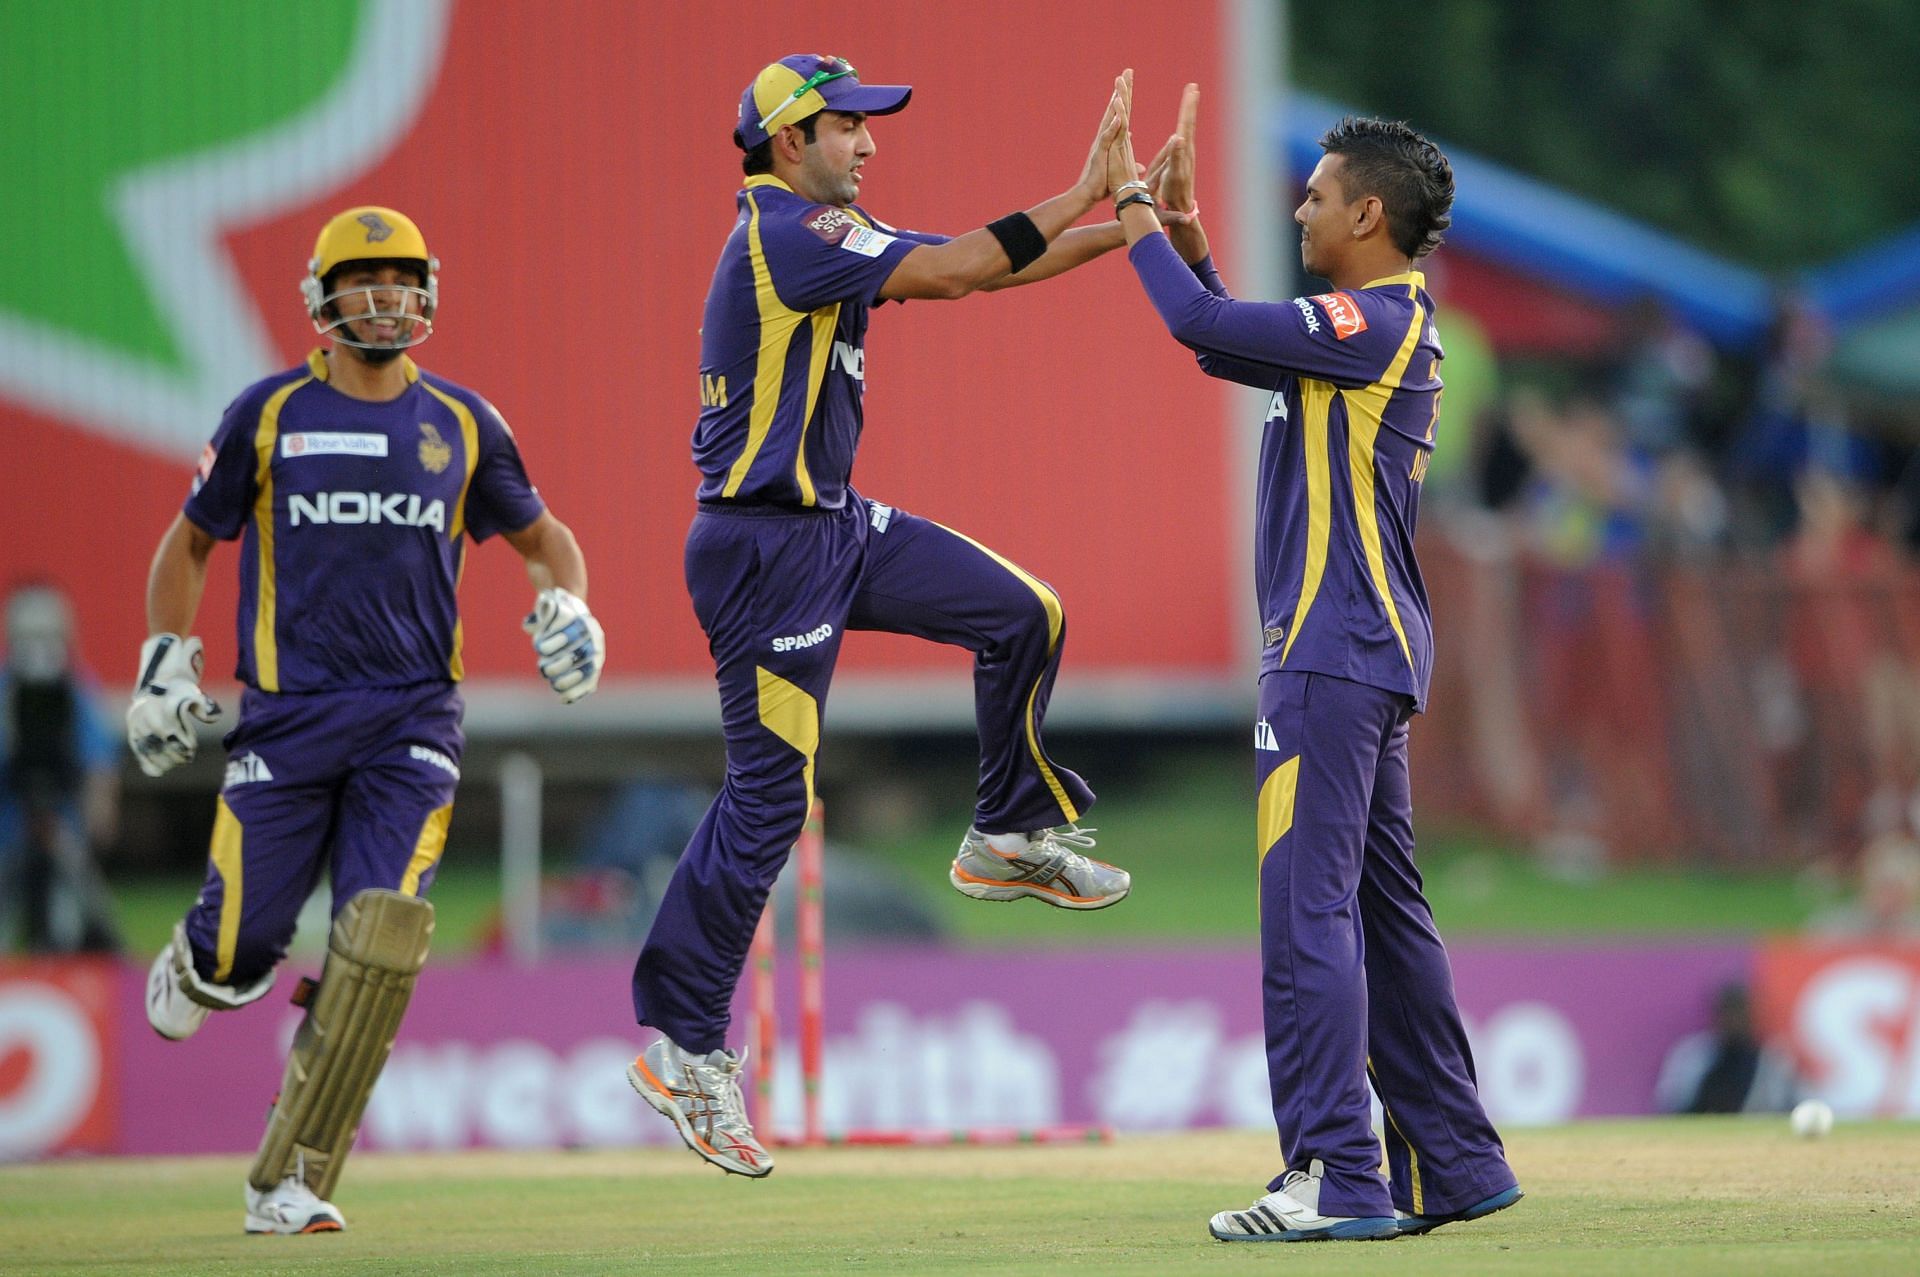 Sunil Narine (right) has been part of the KKR franchise for a decade